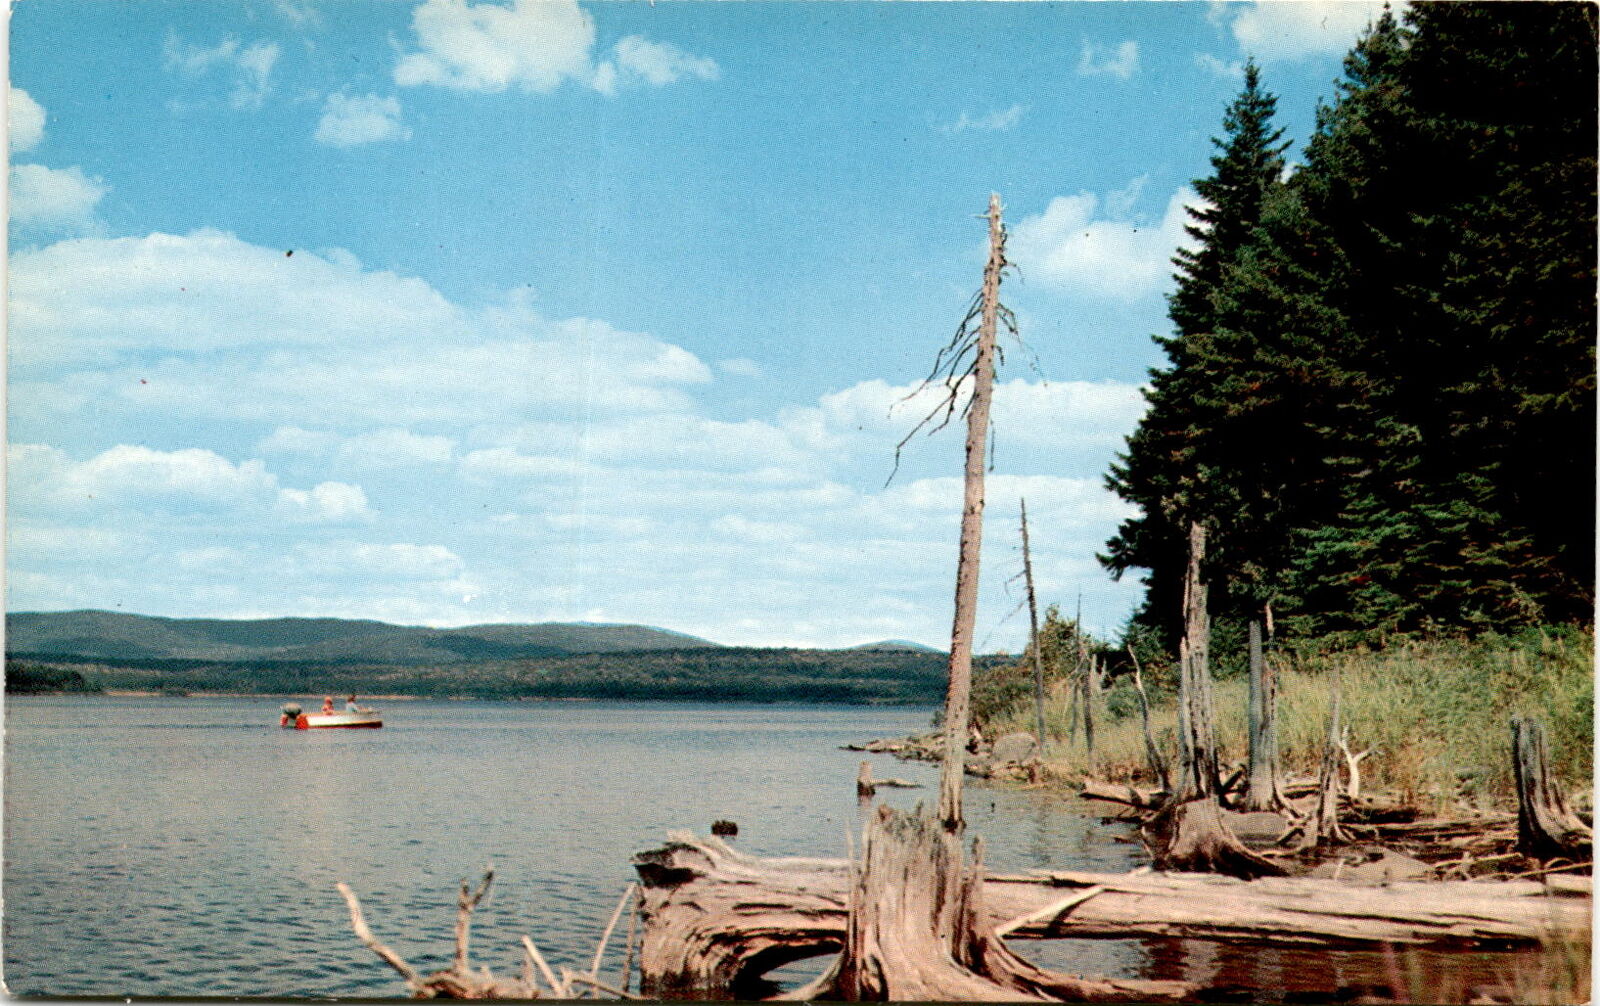 Stunning North Country NH Postcard - Connecticut Lakes, Forests